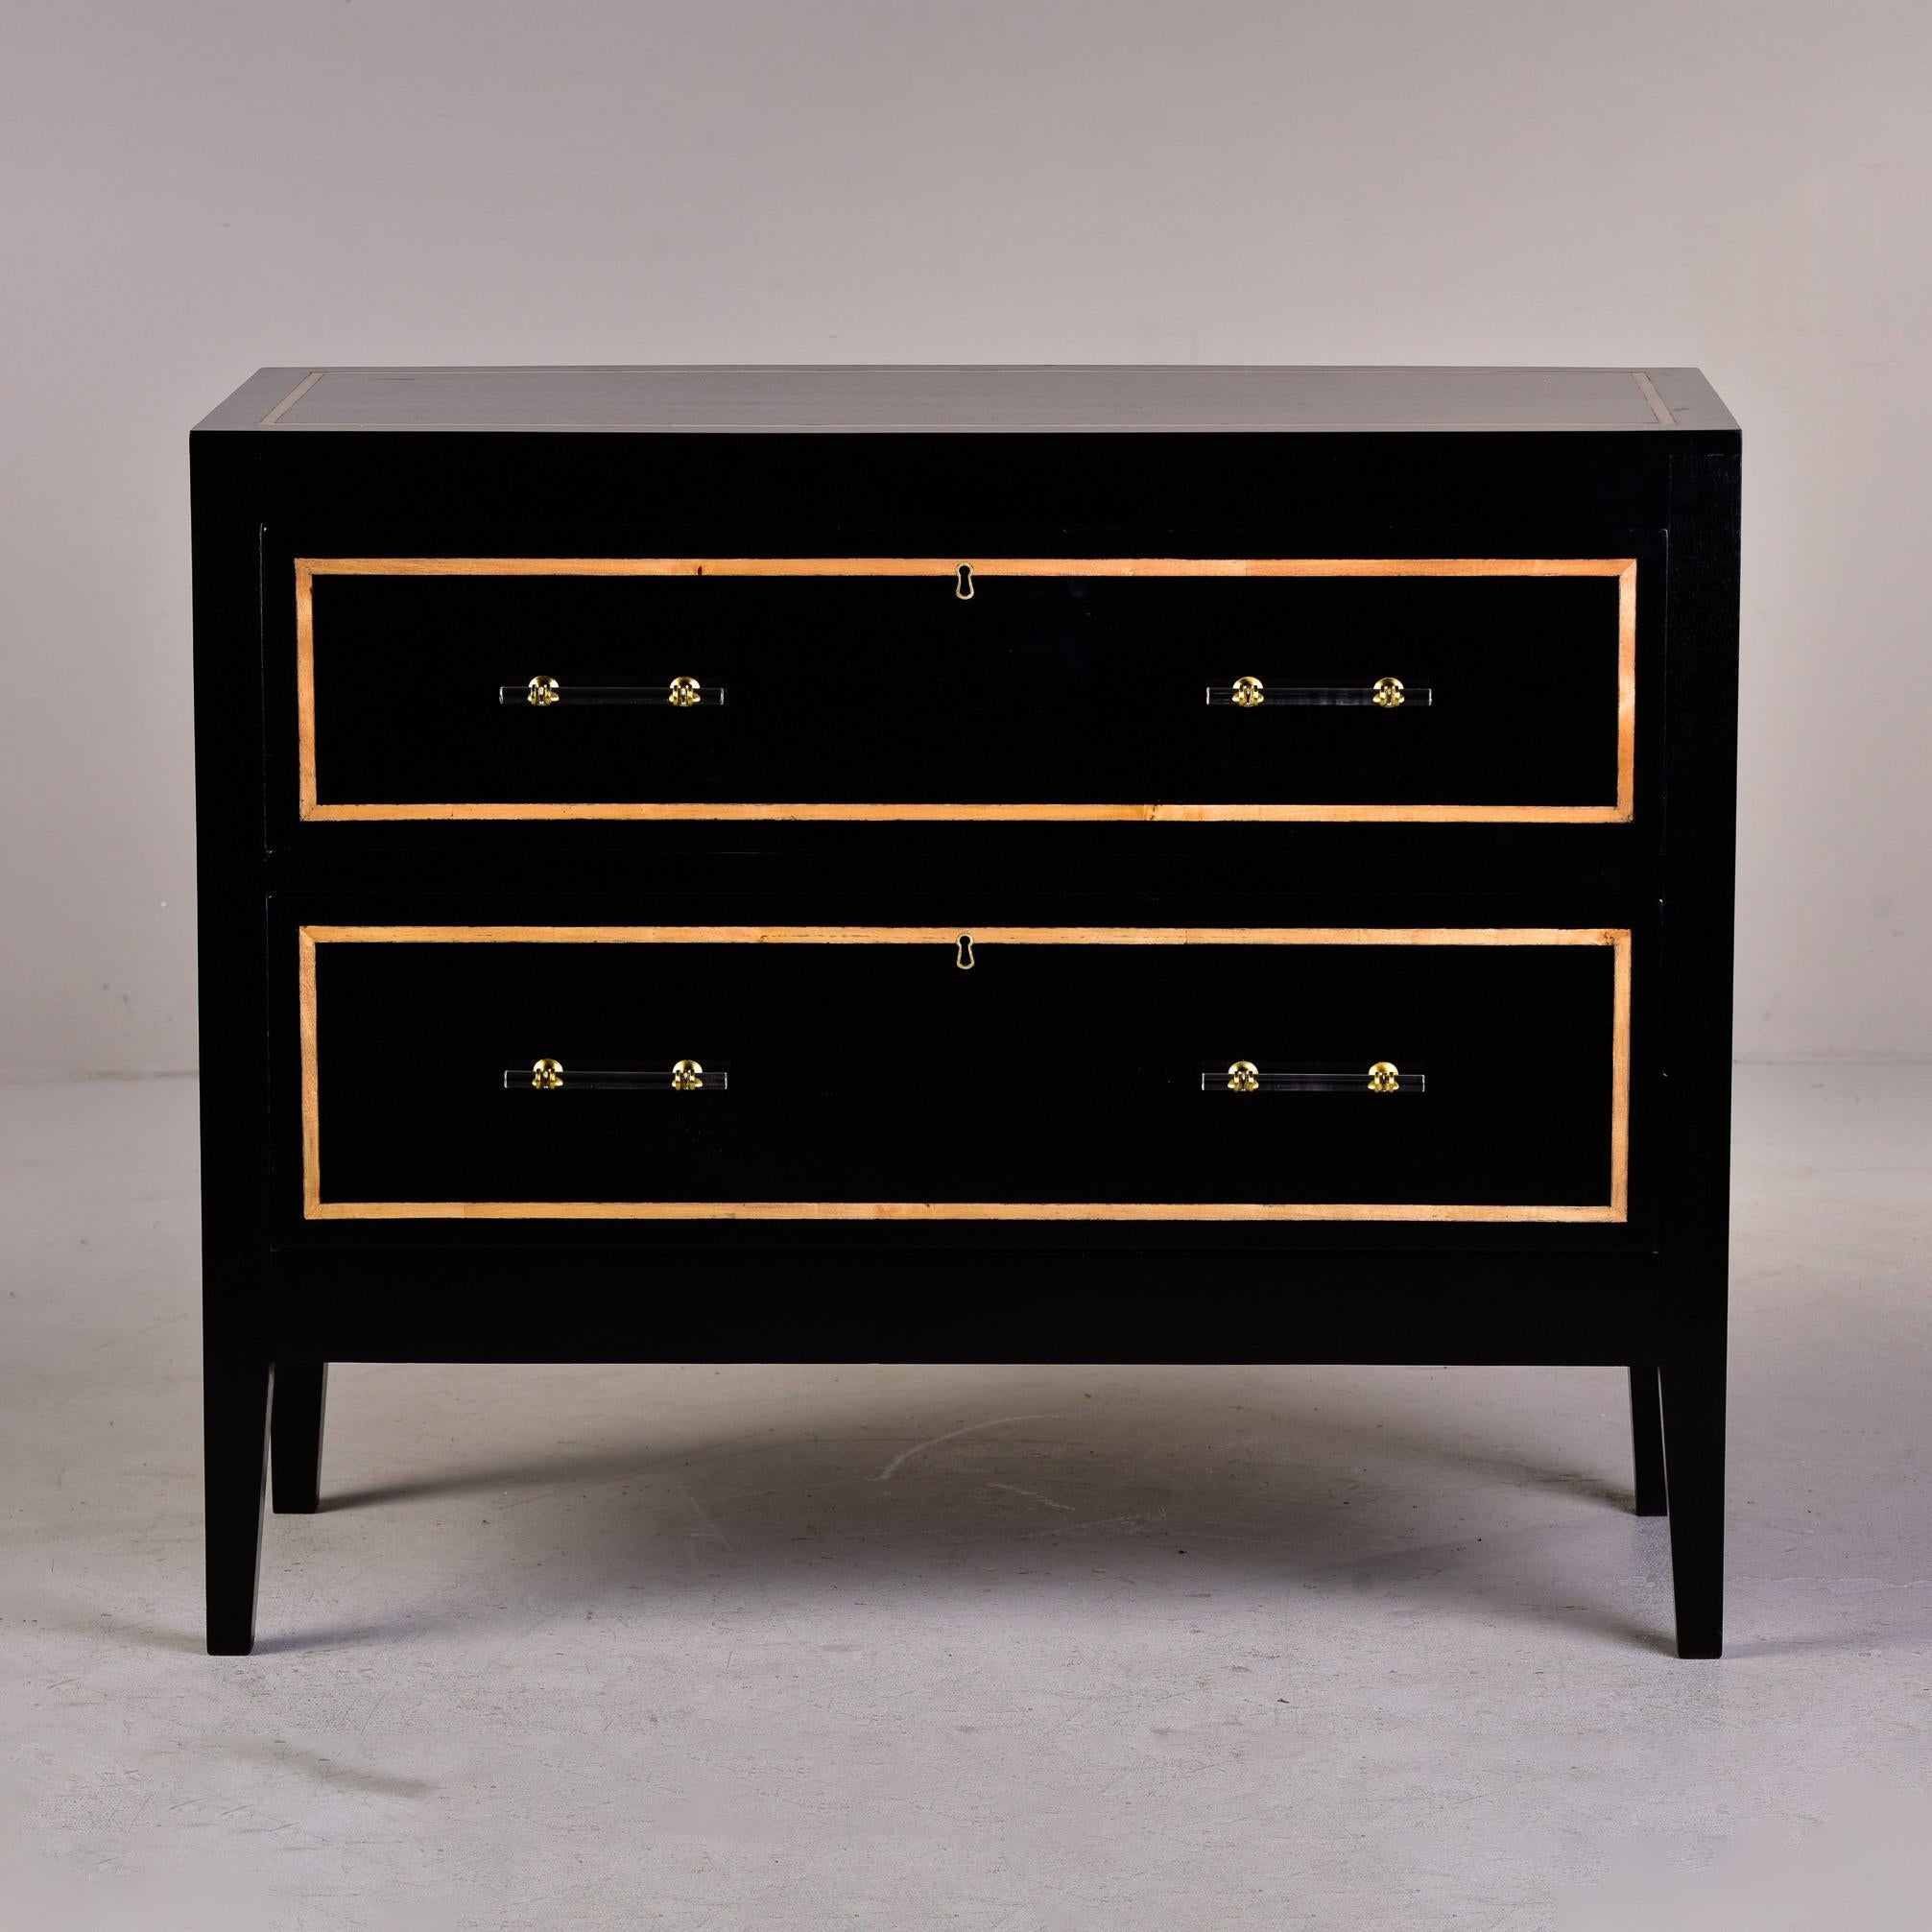 Found in England, this circa 1930s two drawer chest has an ebonised finish and decorative contrasting inlay on drawer fronts, top and side panels. New brass and lucite hardware. Unknown maker.